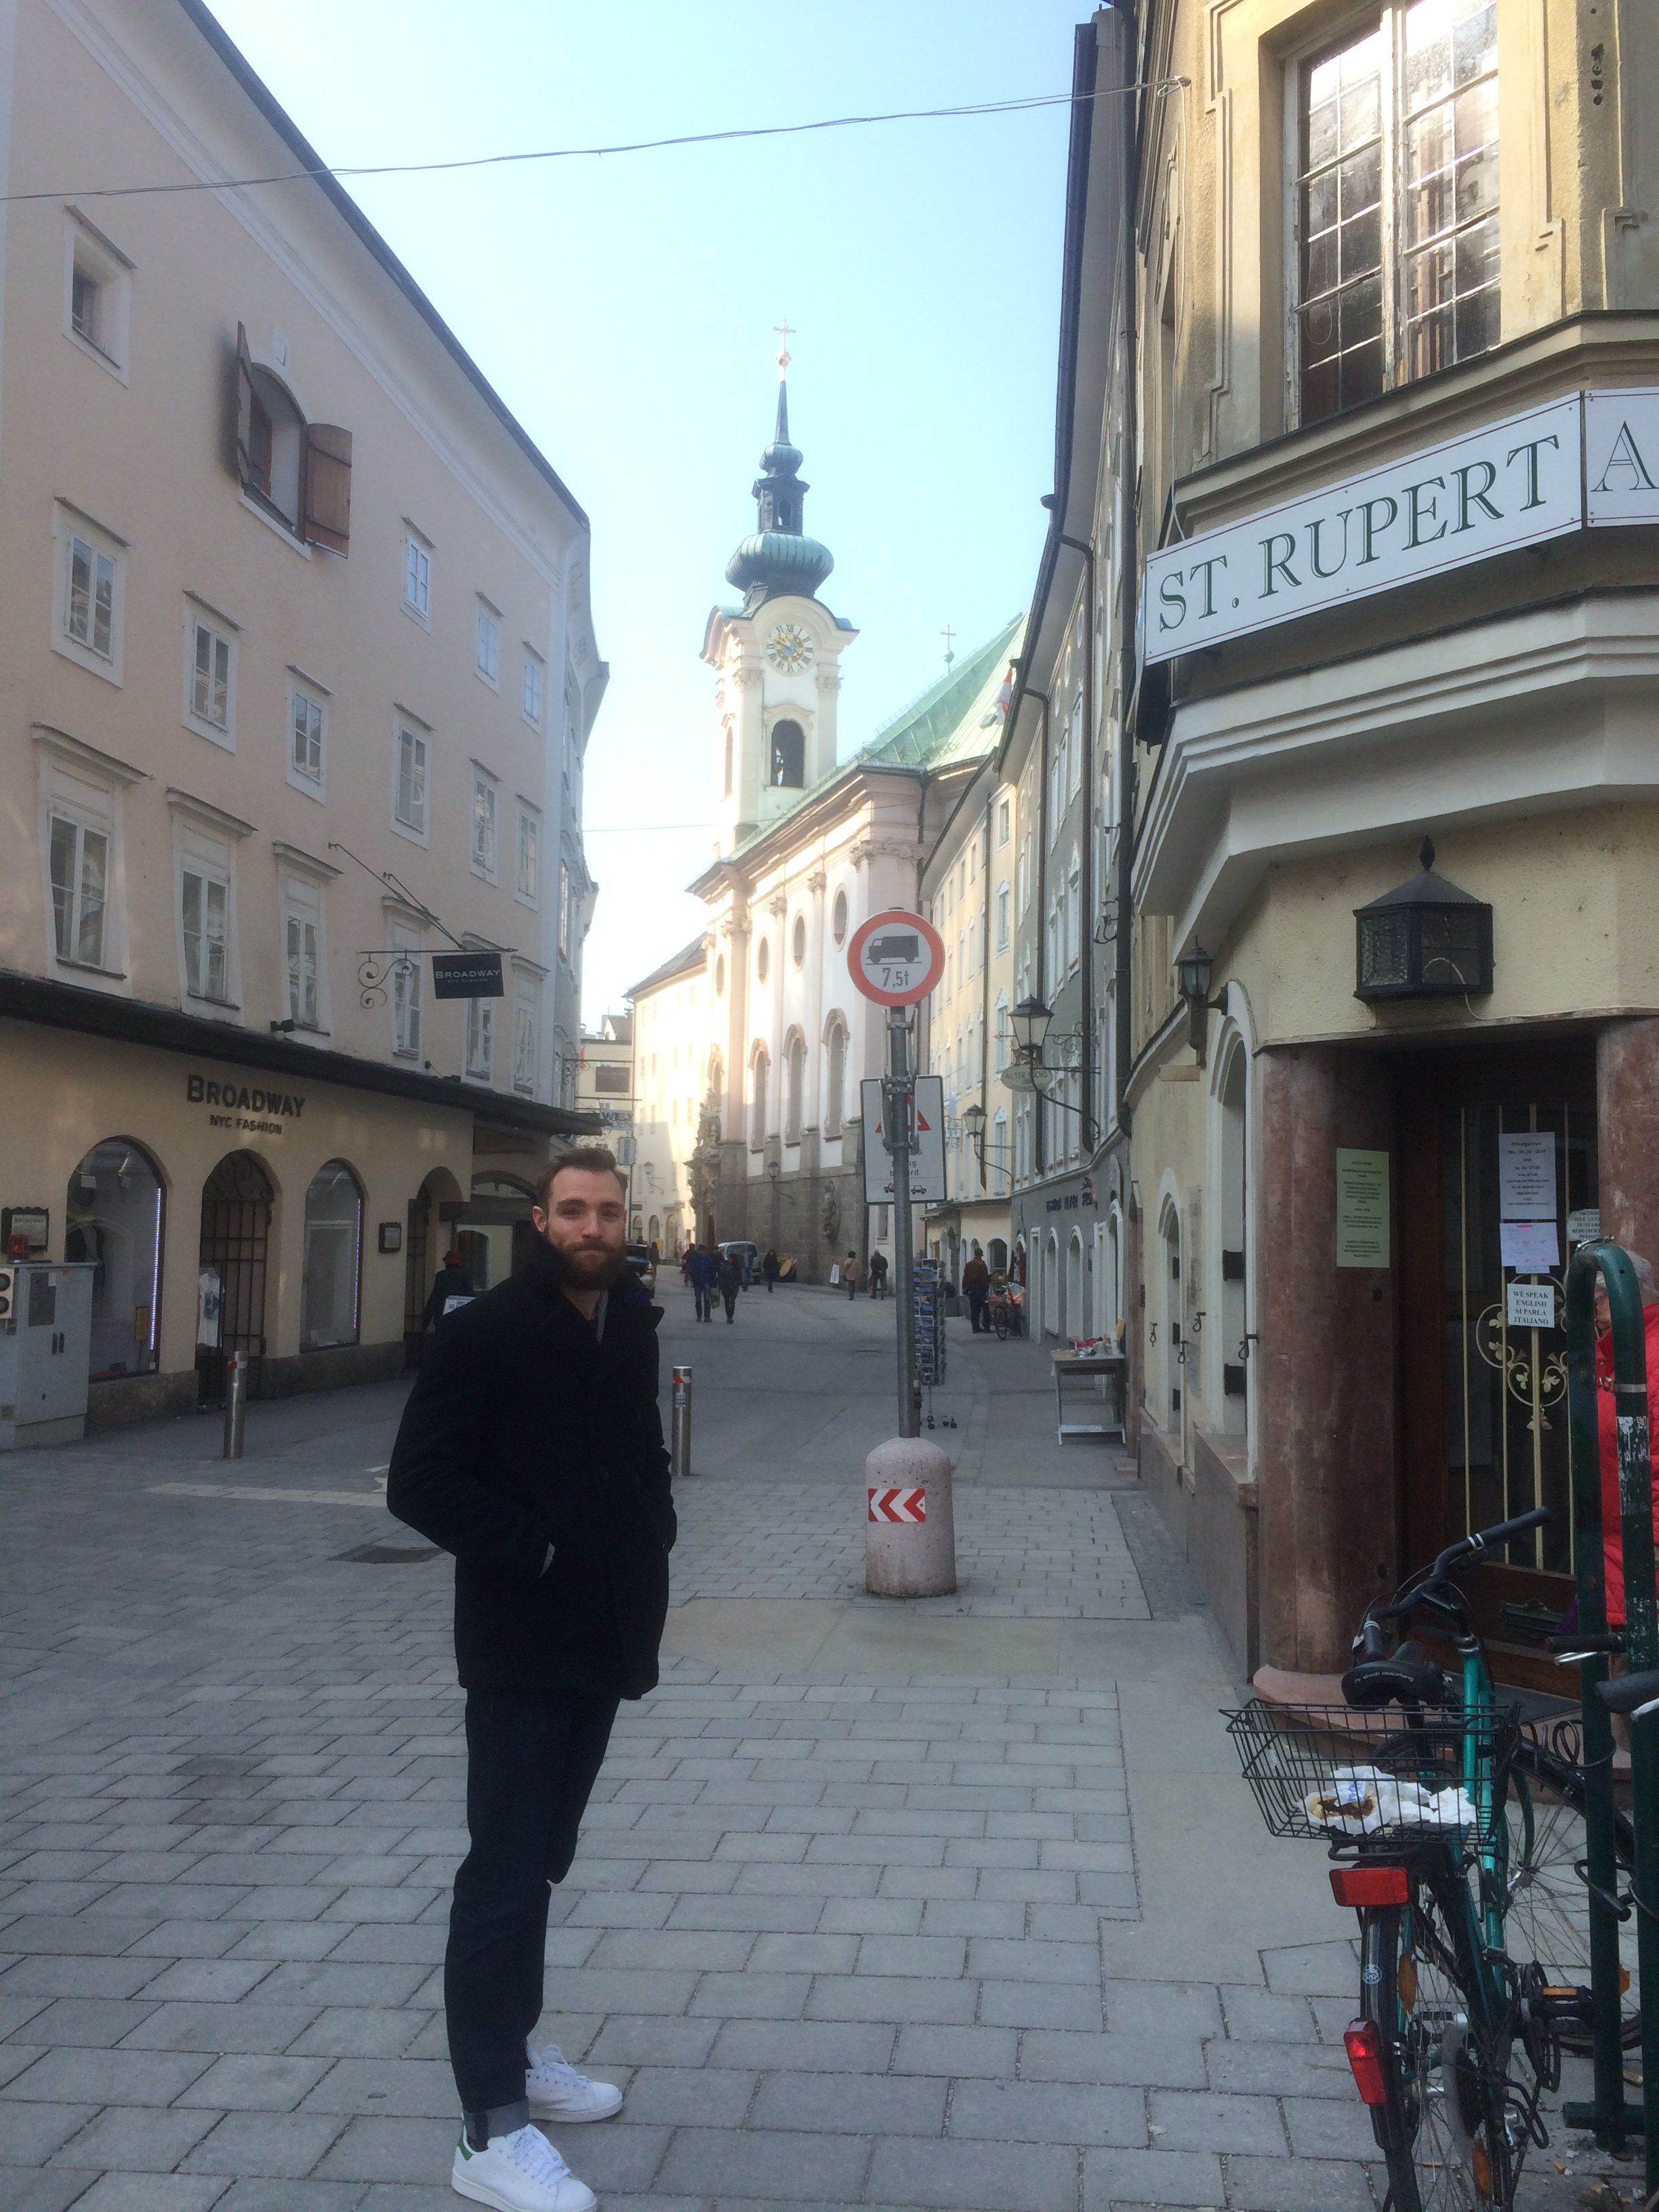 The streets of salzburg